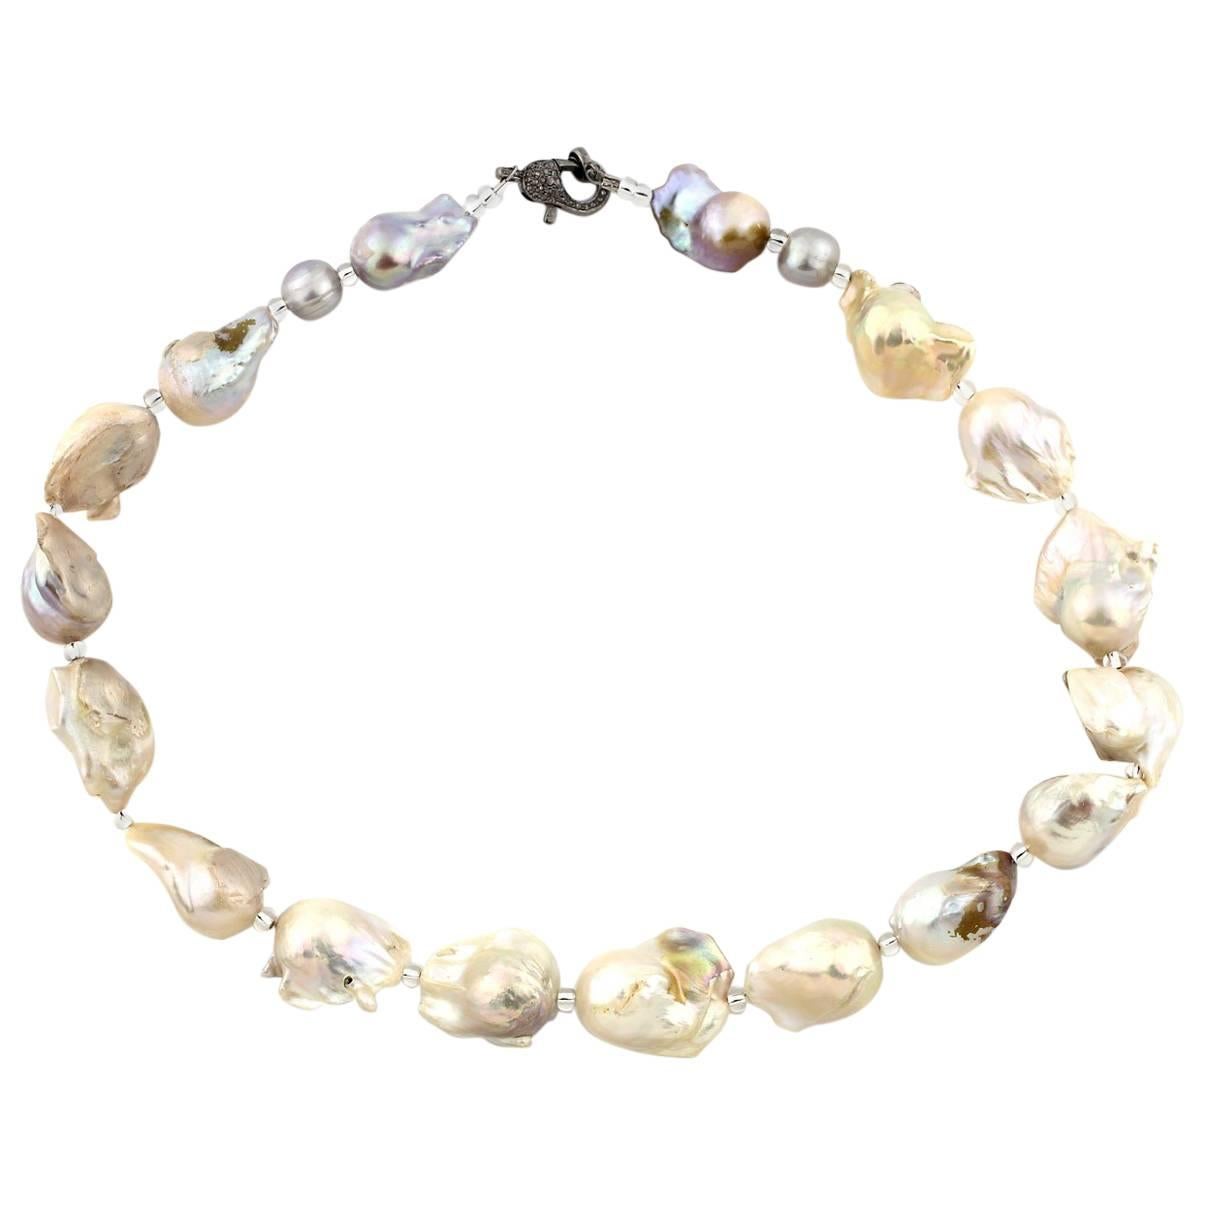 Gemjunky Spectacular 20" Slightly Gold Tone Natural Baroque Pearls Necklace